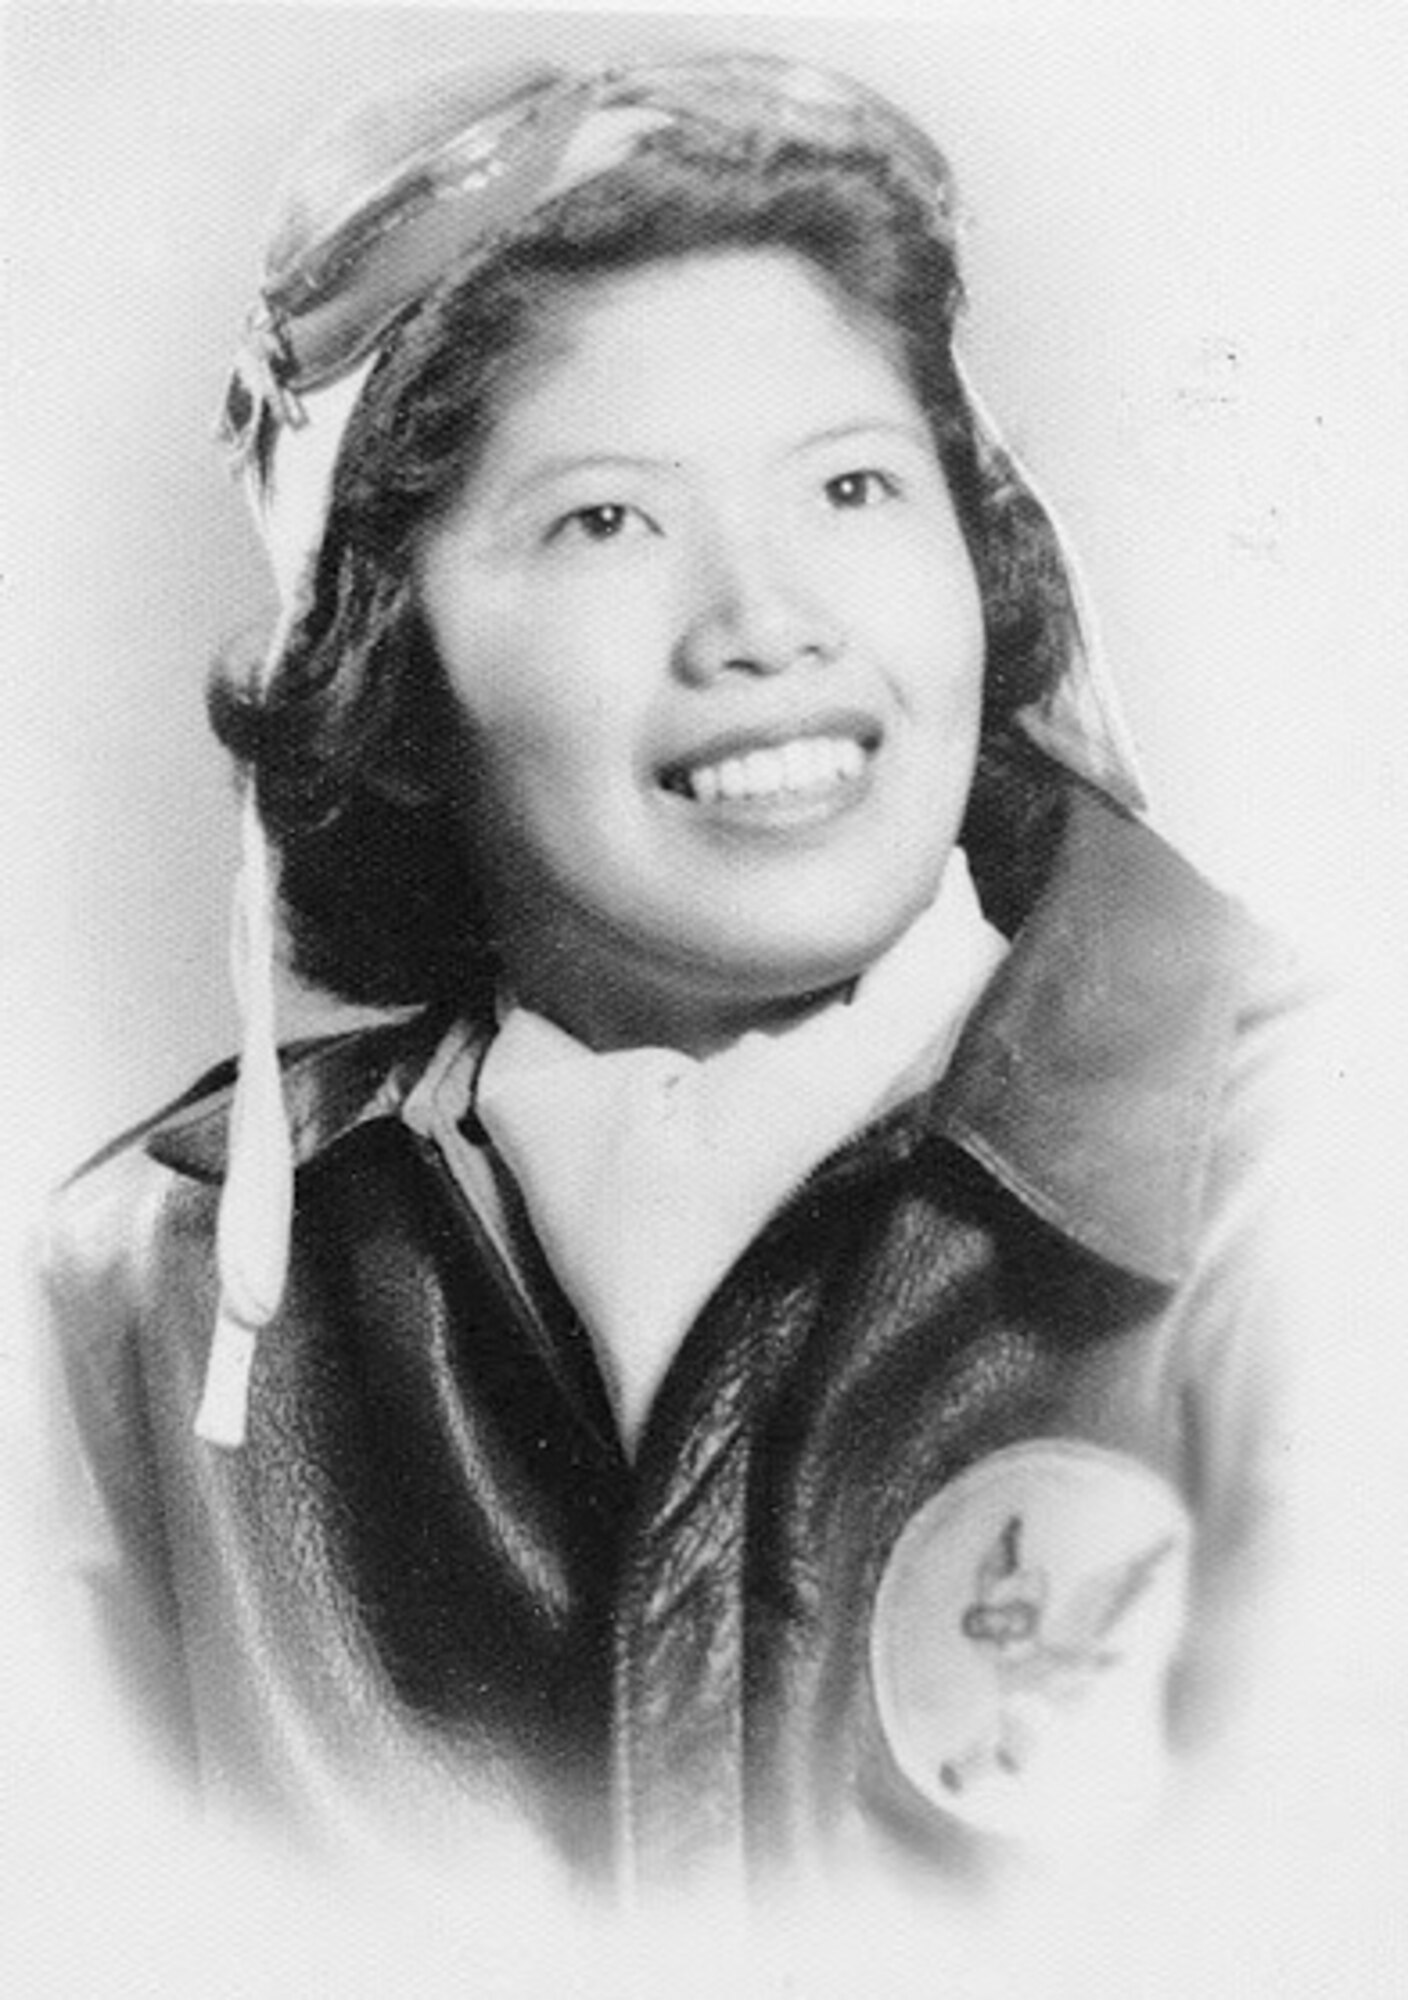 Margaret Gee, who flew with the Women’s Air Force Service Pilots, was one of two Chinese-Americans to fly with the organization during World War II. Gee served as a co-pilot on B-17 Flying Fortresses and TB-25 Mitchells on gunnery training missions. She also served as an instrument instructor for pilots returning from combat who needed their instrument rating recertified. (Courtesy Photo)